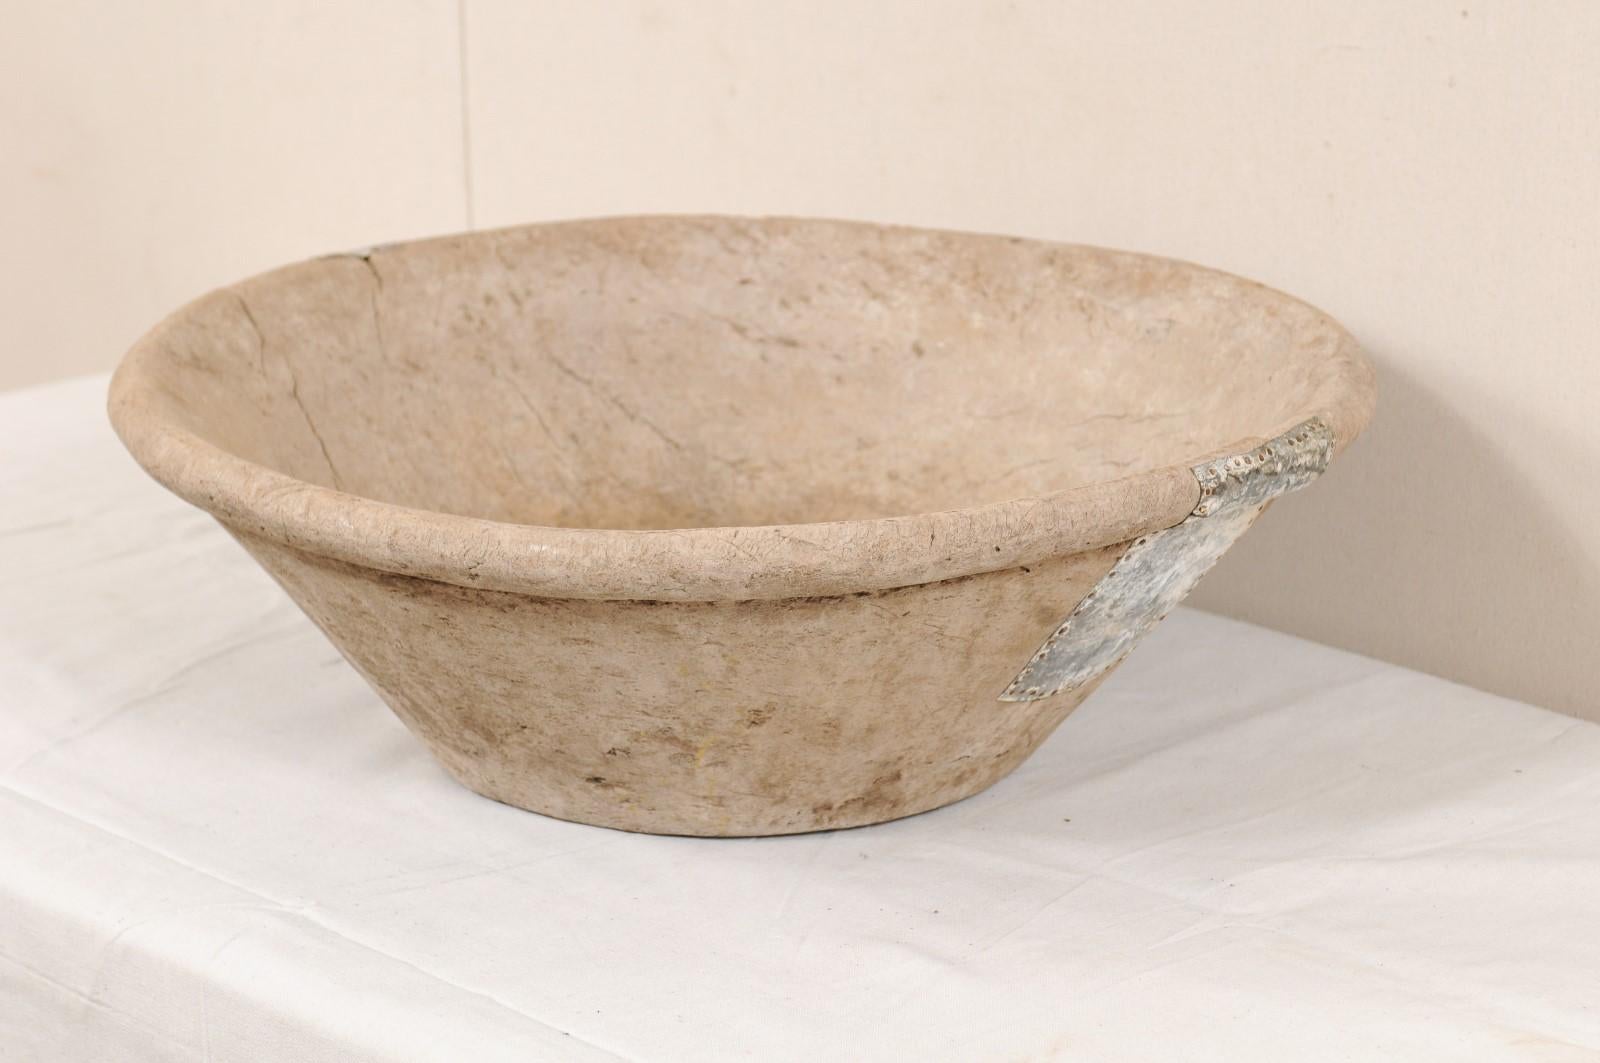 A Turkish burl wood dough bowl from the 19th century. This antique bowl from Turkey has been hand carved from wood and has fabulous old metal repairs in three areas about it's exterior. This round-shaped bowl, handcrafted from burl wood, has a